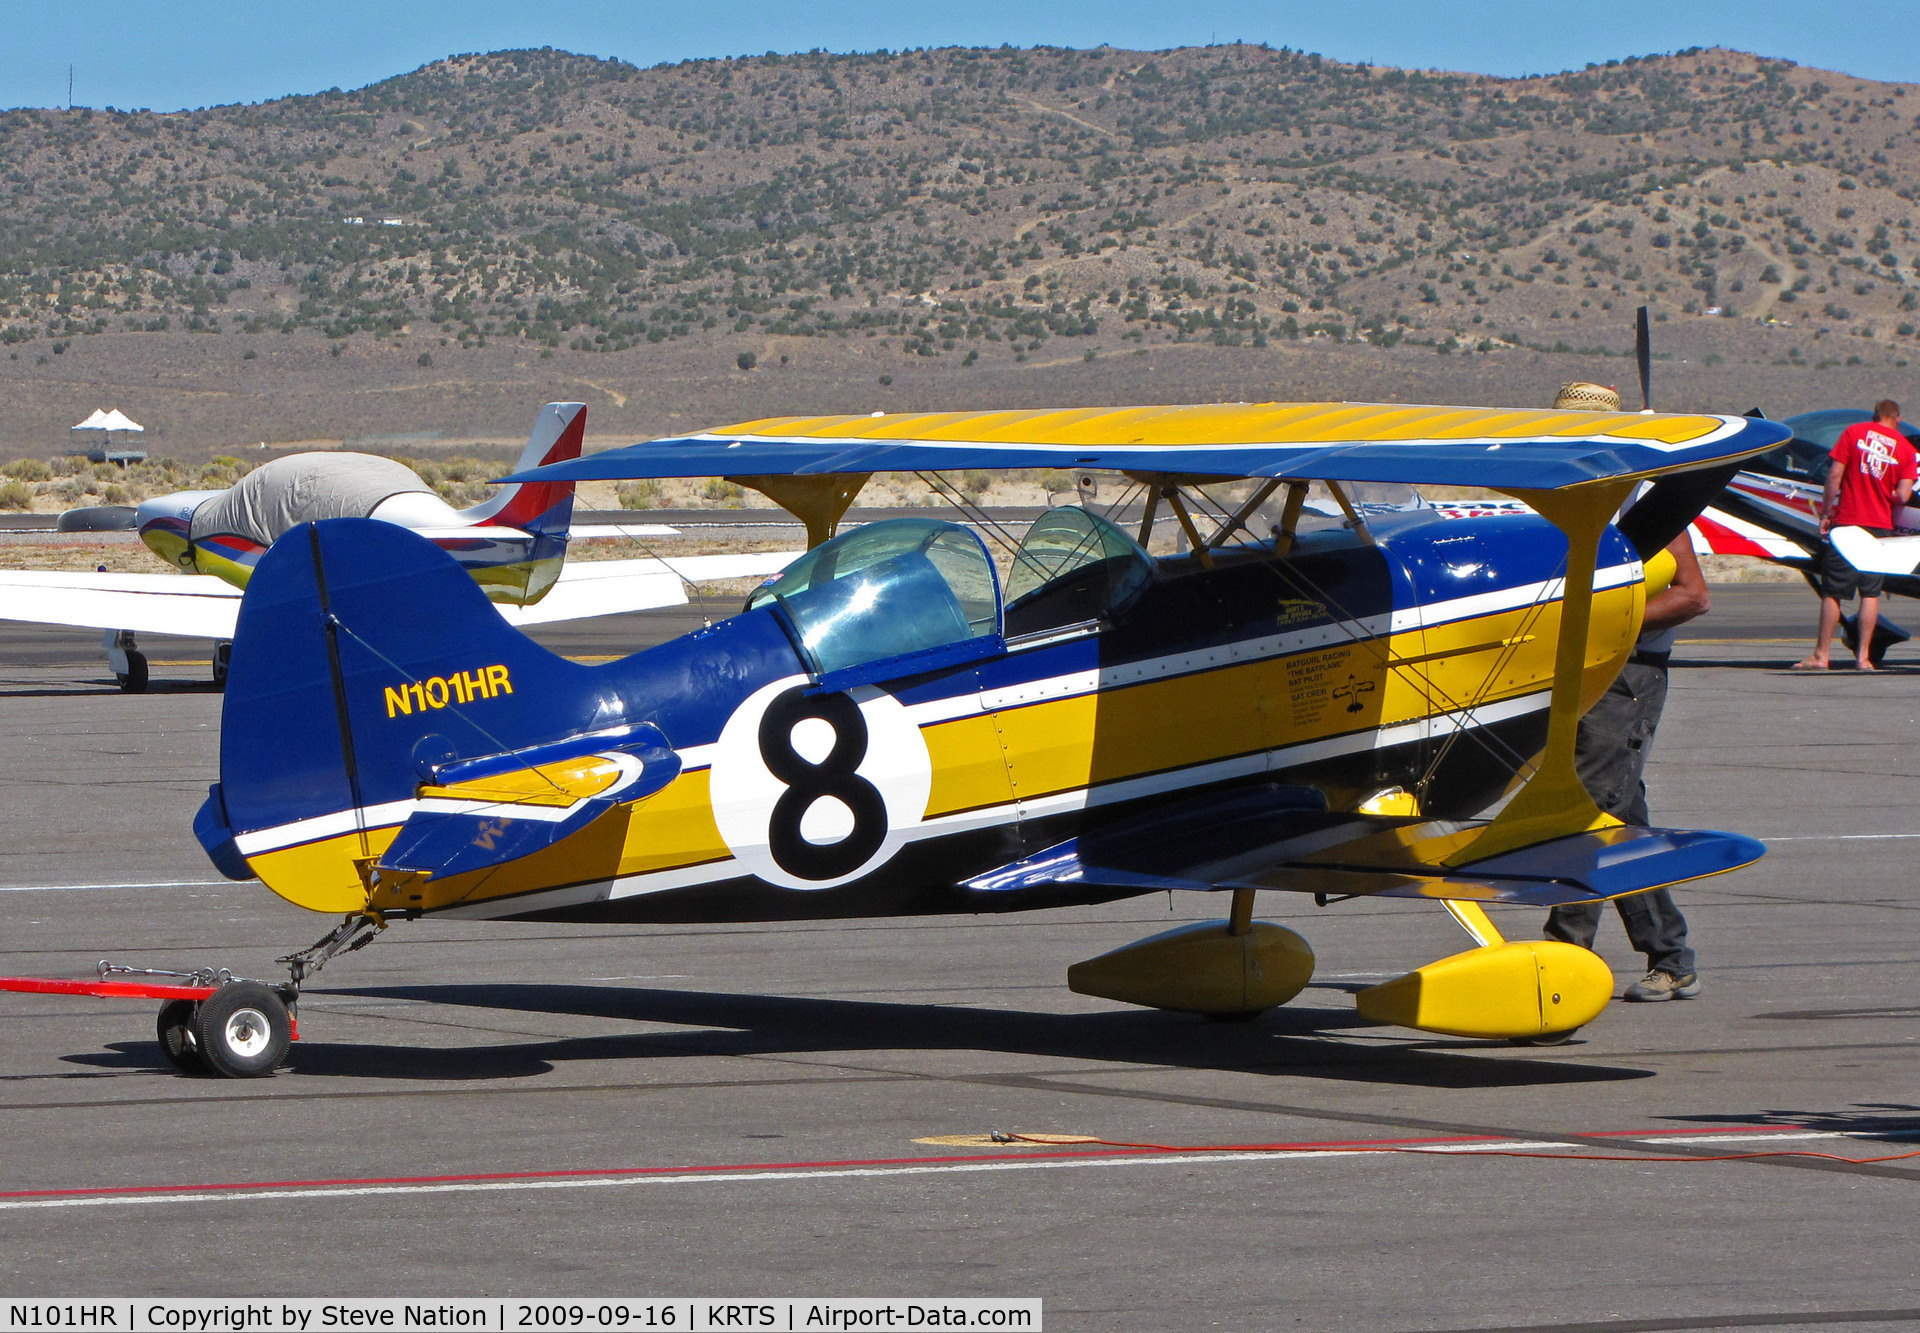 N101HR, 1993 Pitts S-1S Special C/N COBB 001, Race #8  1993 Cobb Lawrence L PITTS S1S @ 2009 Reno Air Races - being towed